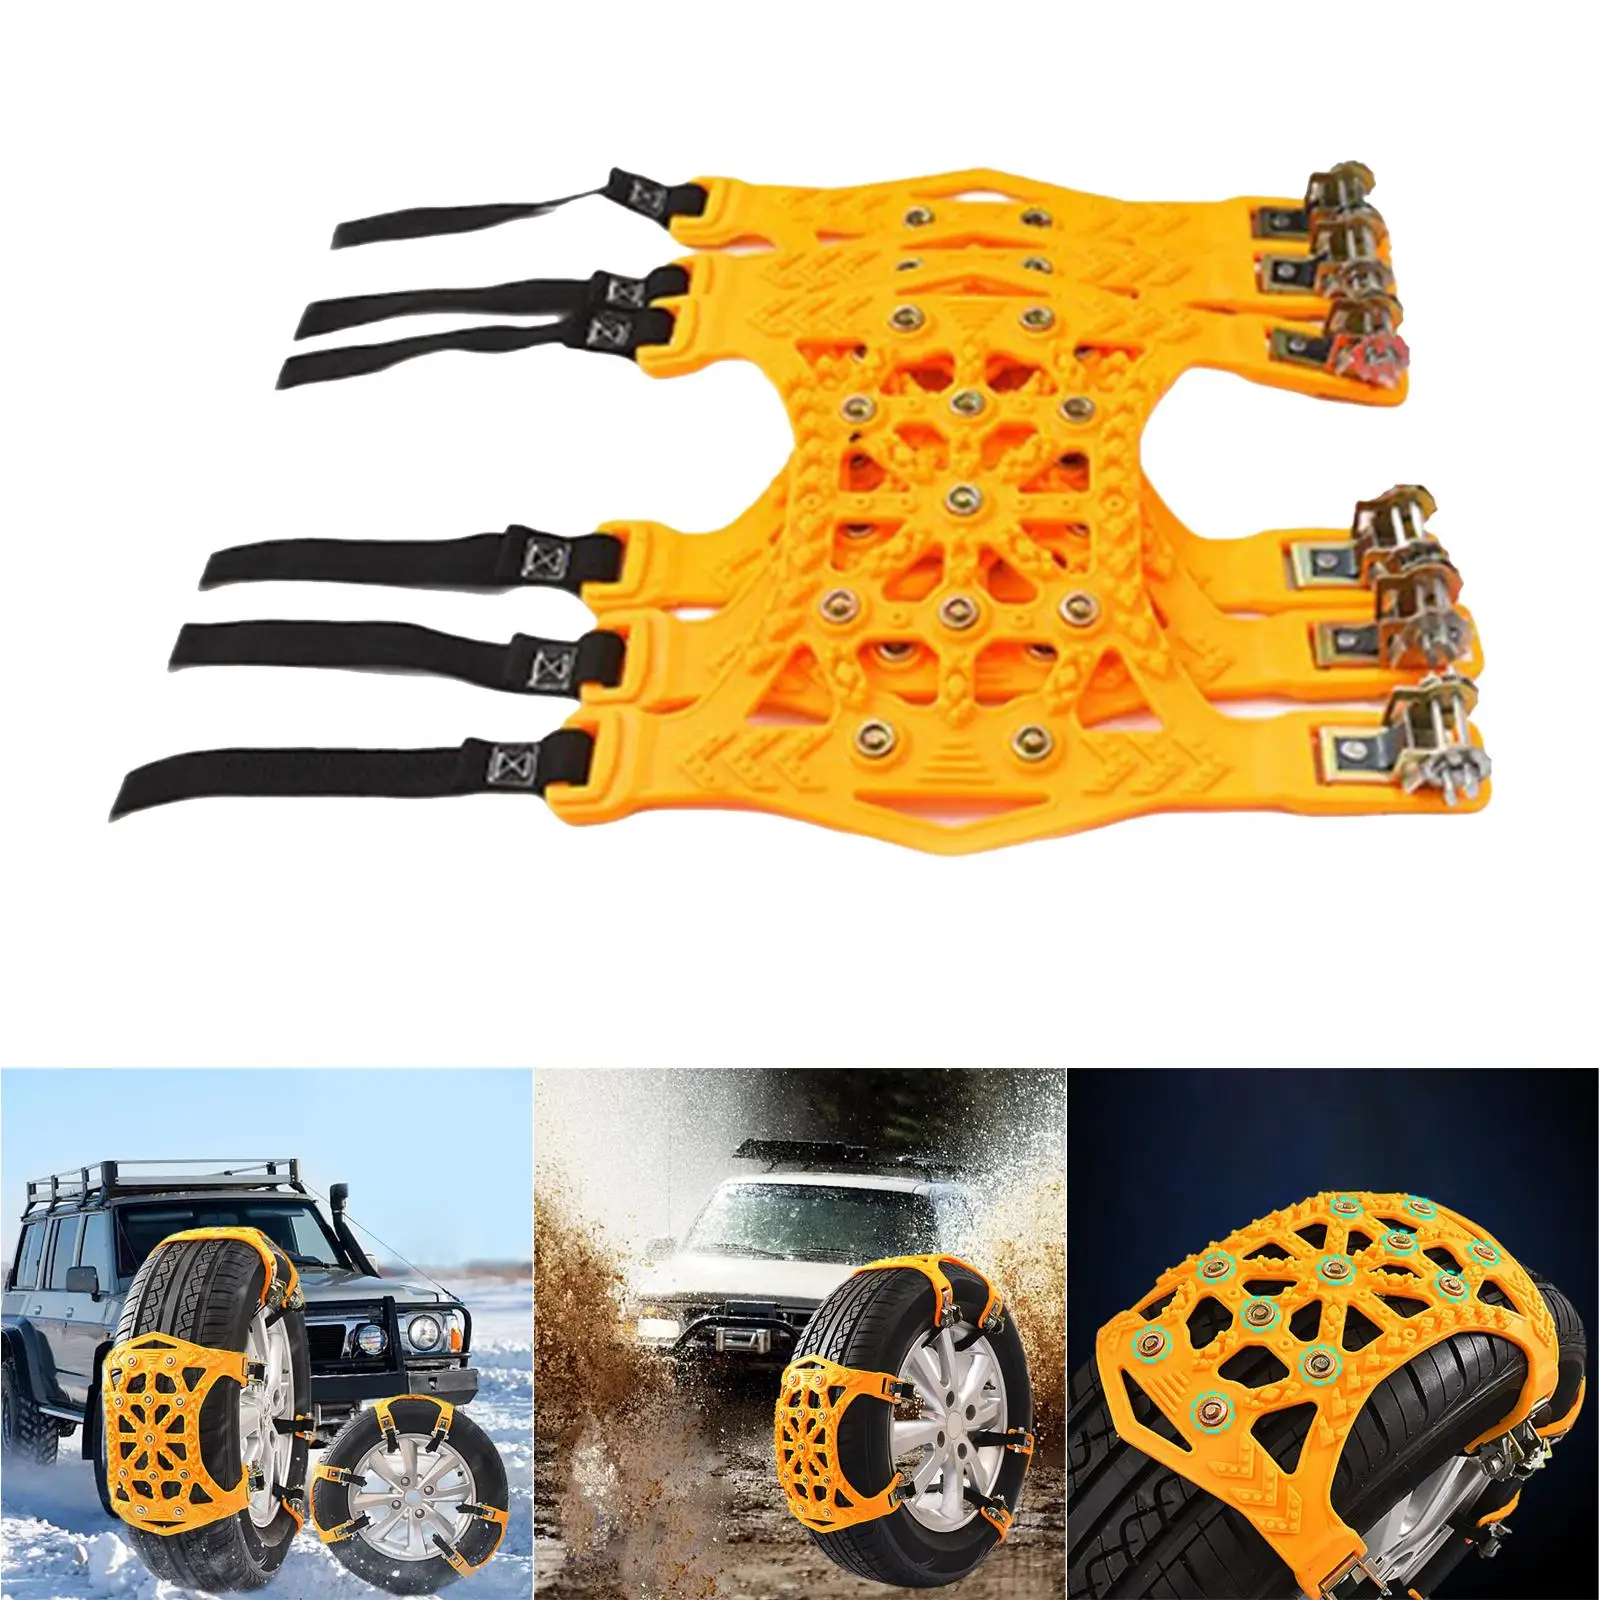 3Pcs Thickened Anti Snow Chains of Car, Applicable Tire Width 165-265mm Adjustable Accessories Tire Chain Belt for Emergency